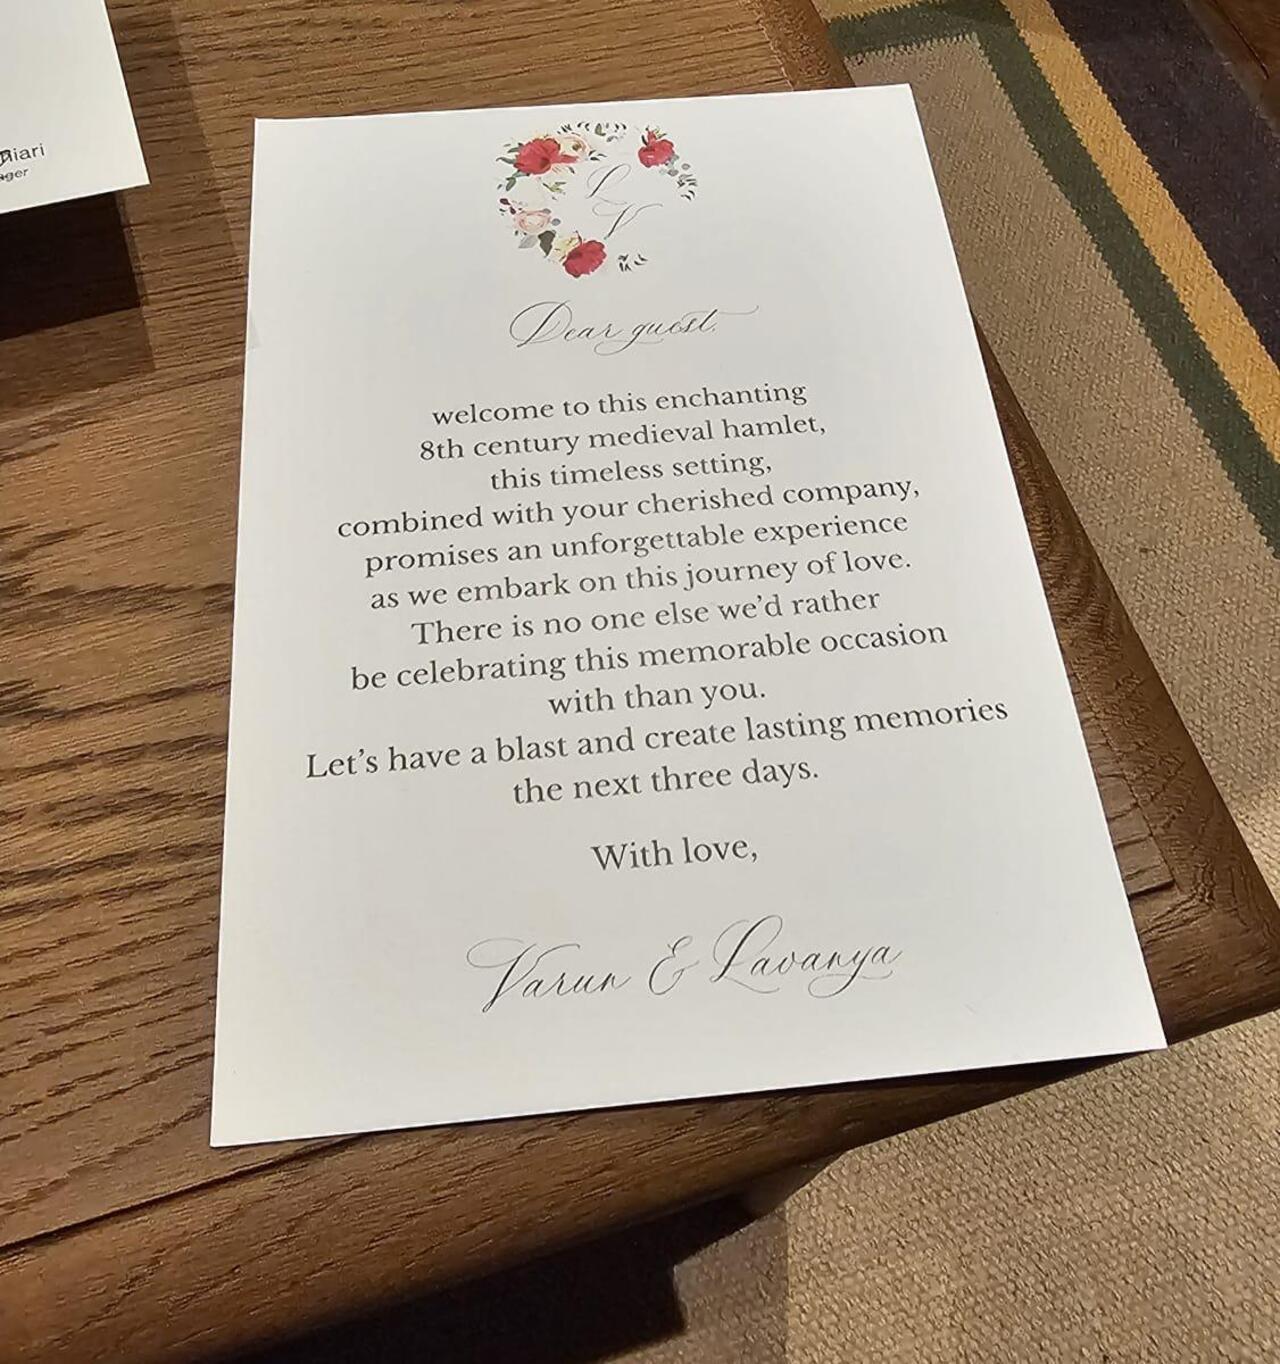 Ahead of the cocktail party on Monday evening, every guest was given this special note